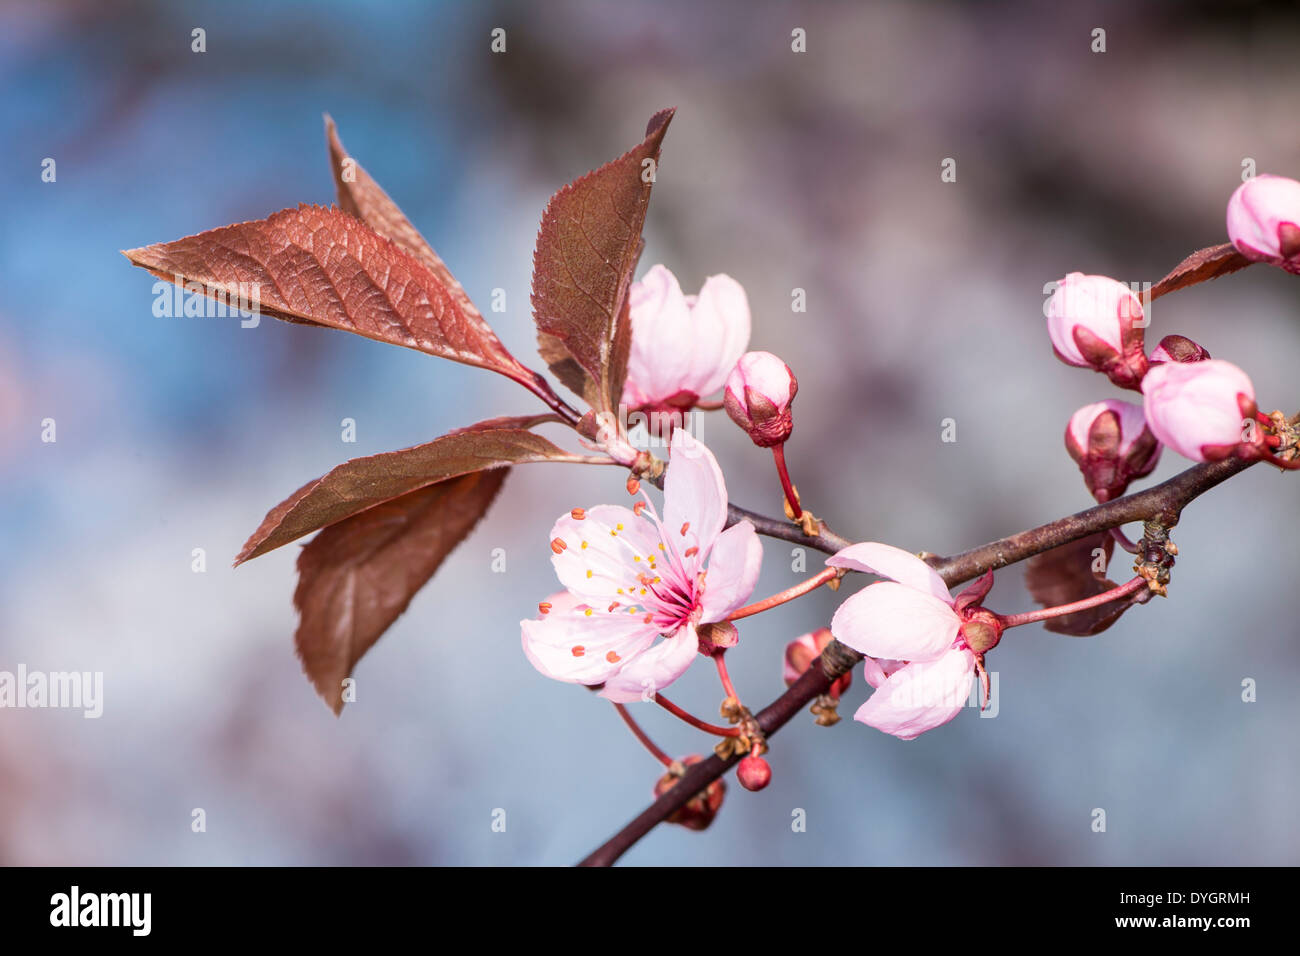 Spring scenic - twig with pink plum blossoms Stock Photo